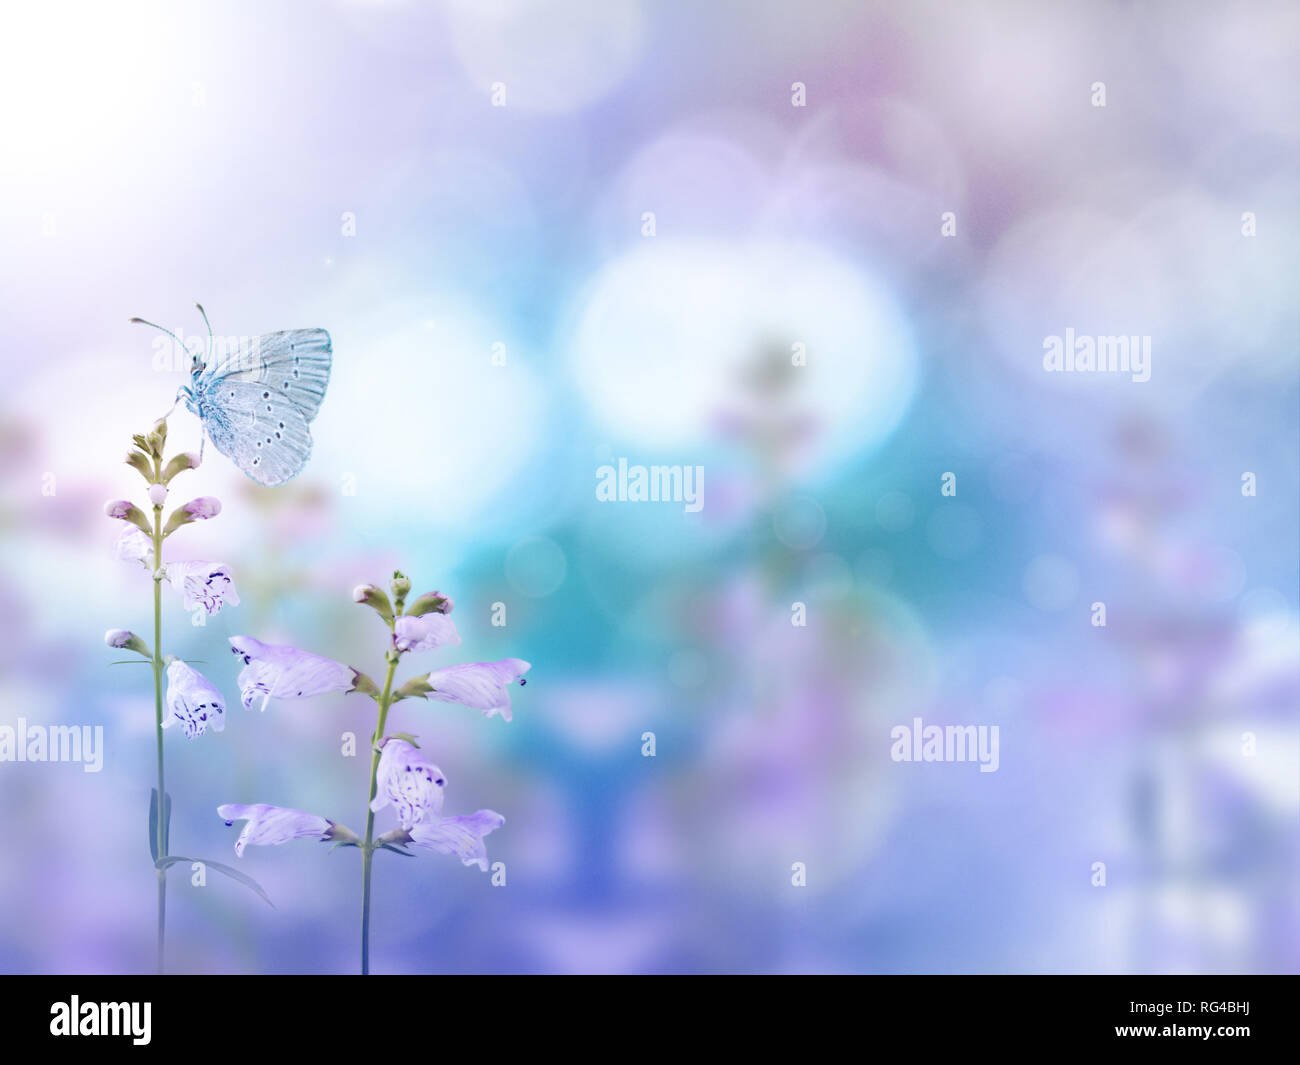 Butterfly and light purple flowers on the colorful blurred background. Floral desktop. Stock Photo